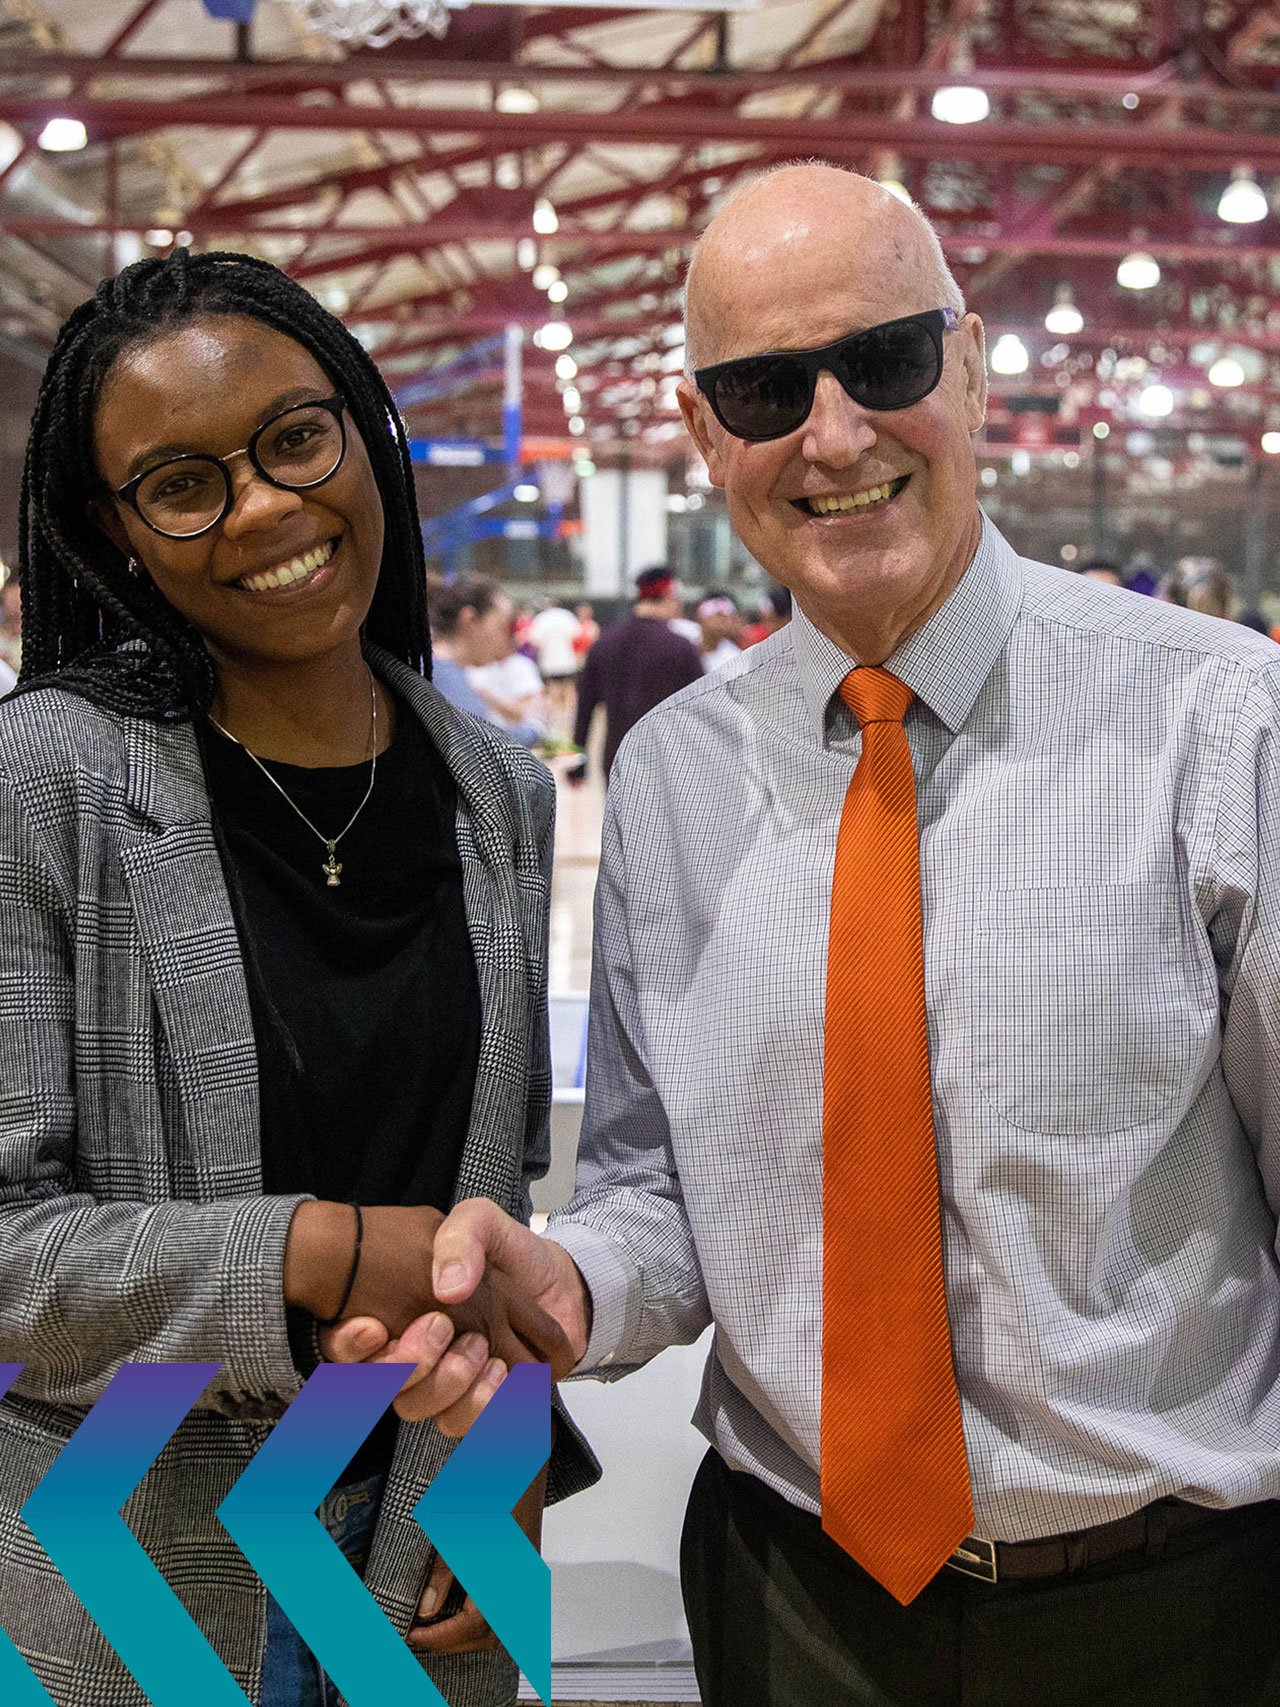 Jakiyah shaking hands with NYU President Andy Hamilton at an event.